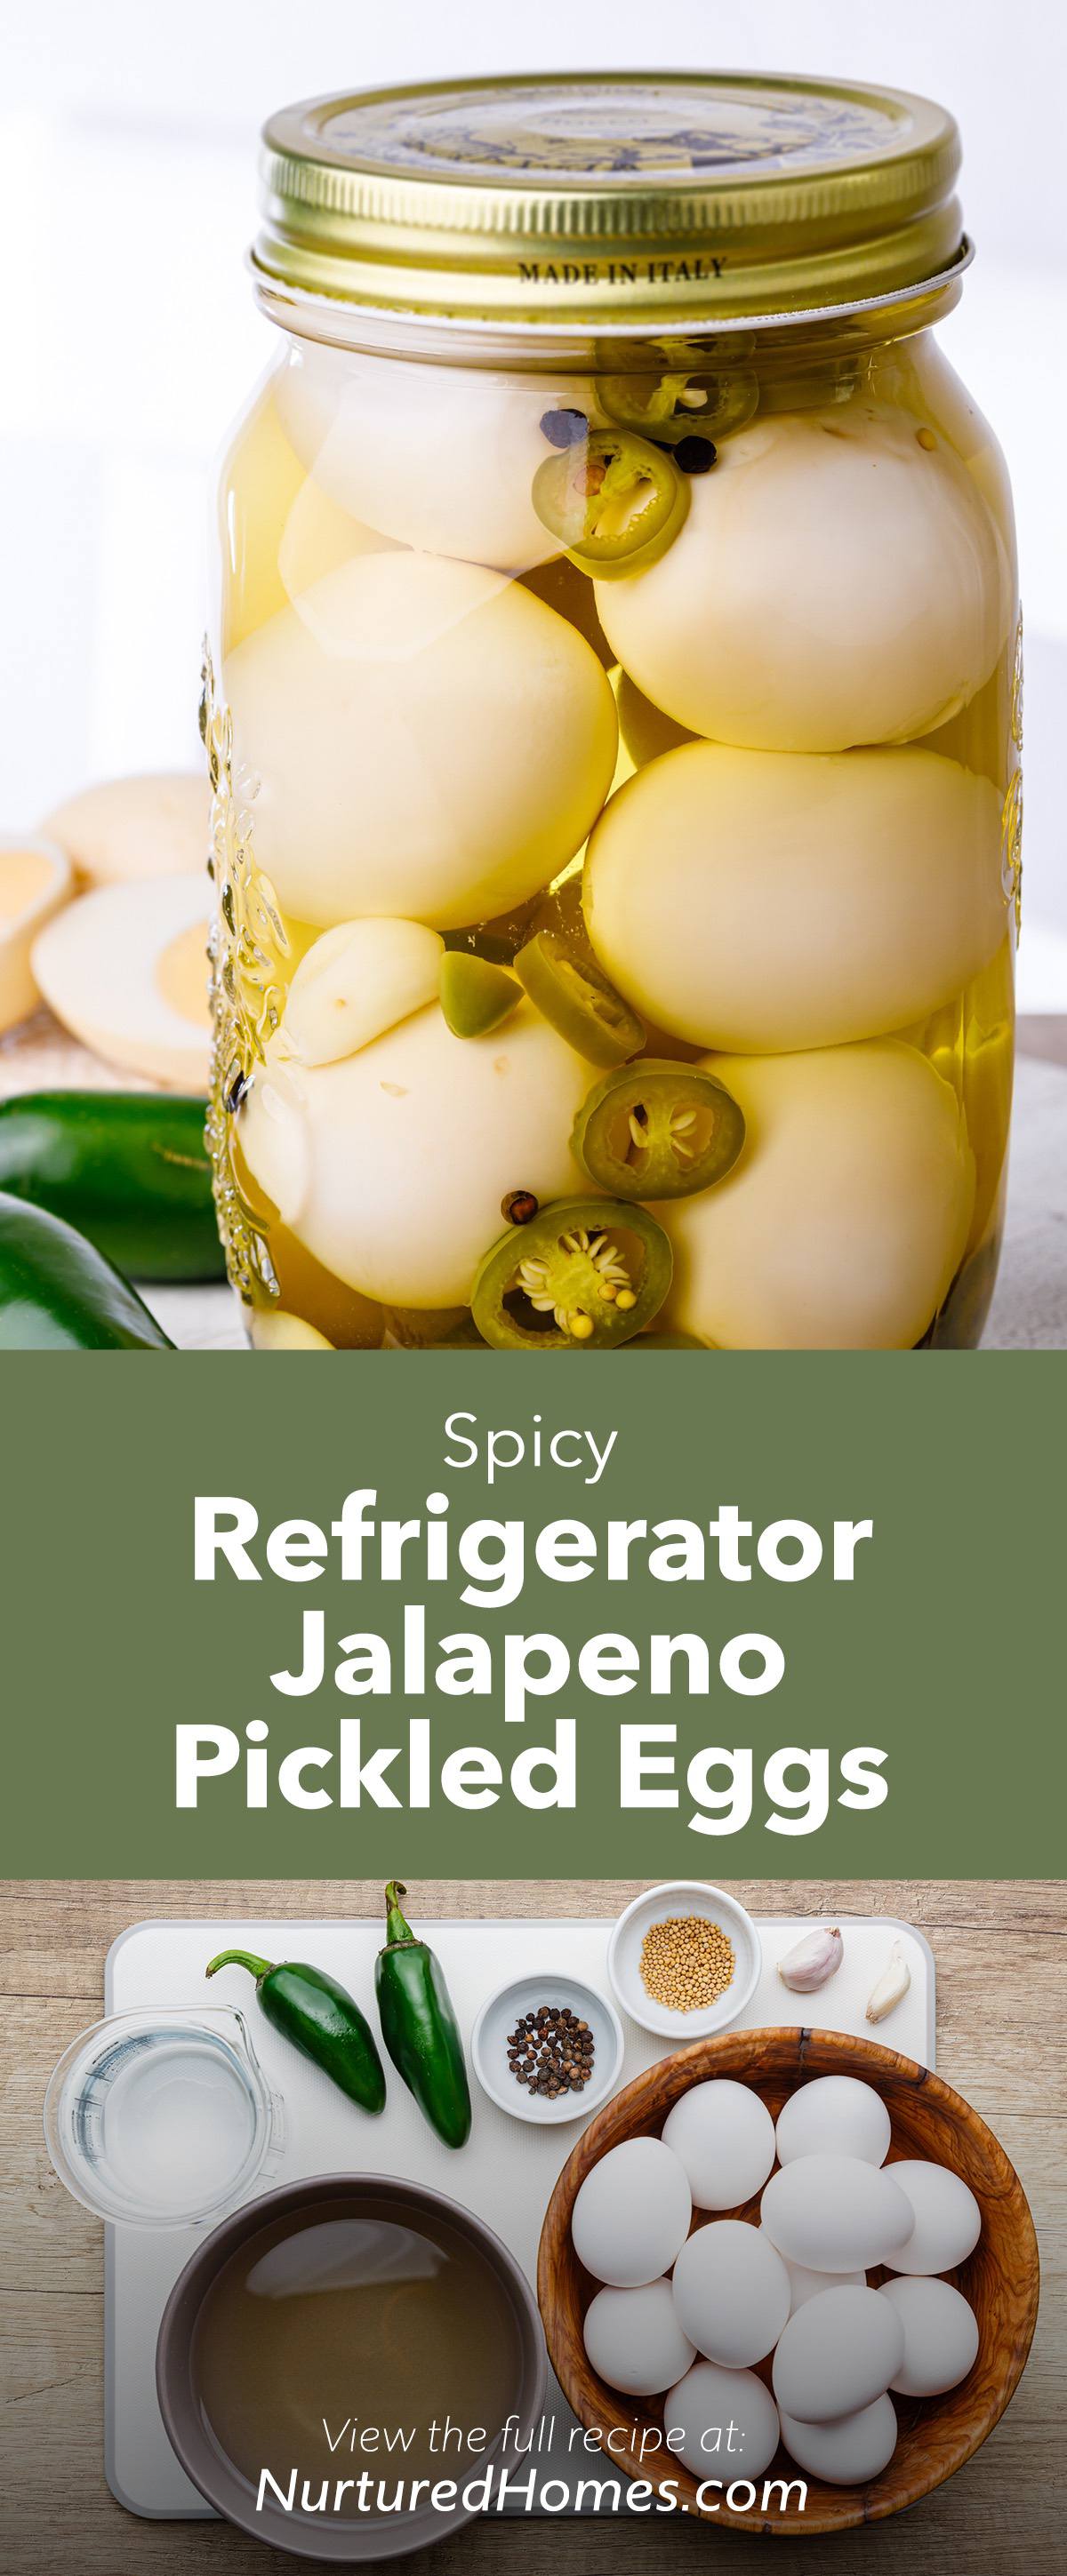 Spicy Jalapeno Pickled Eggs